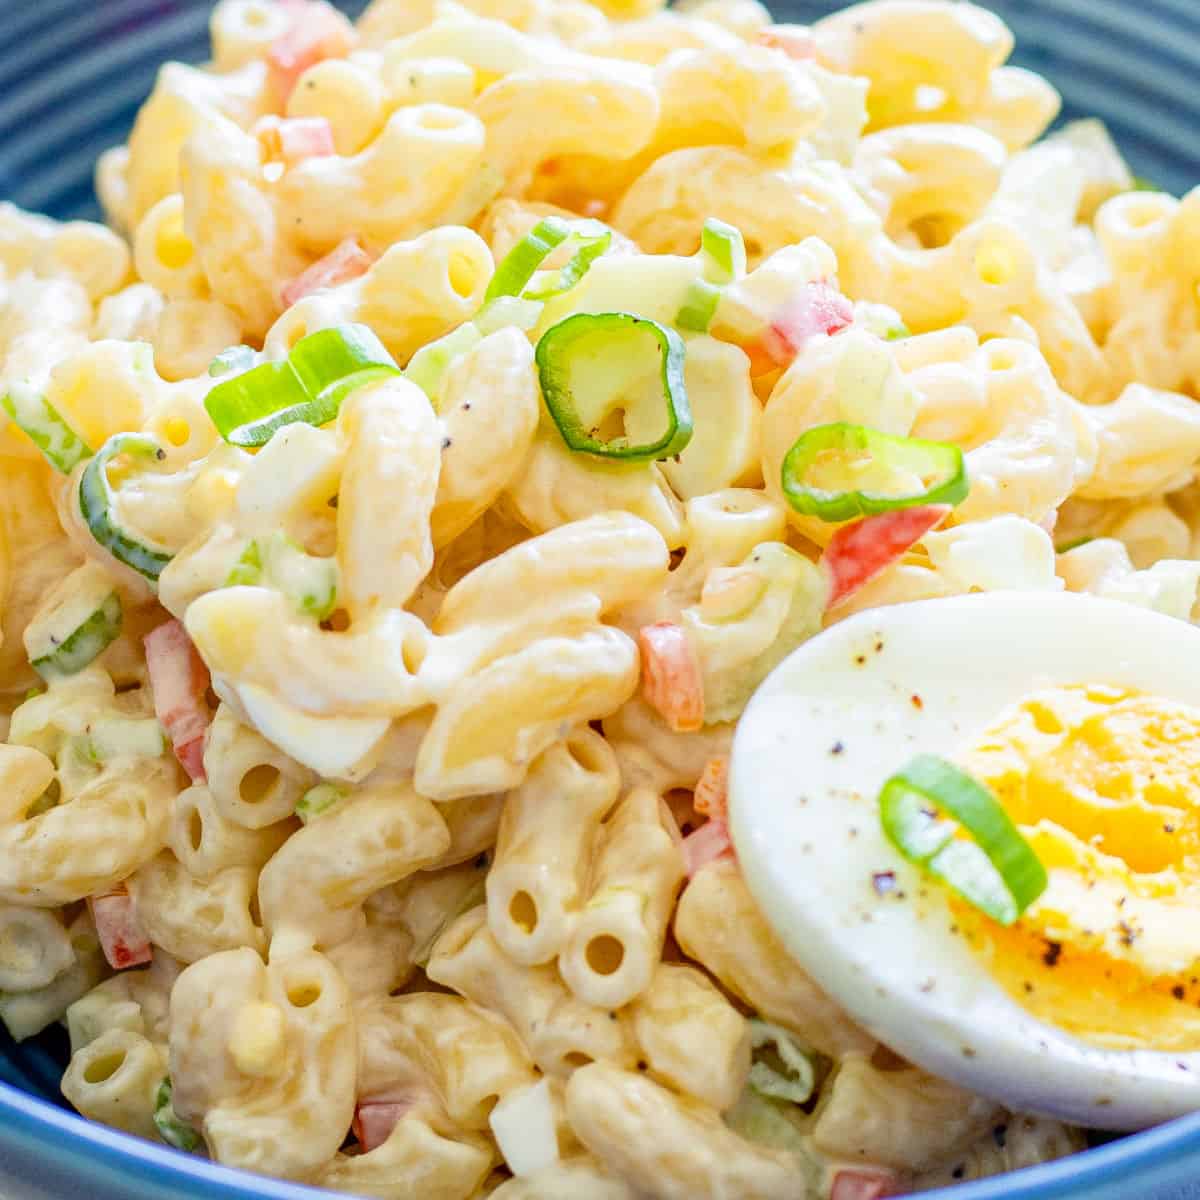 close up of macaroni salad in a blue bowl with half of a hard boiled egg